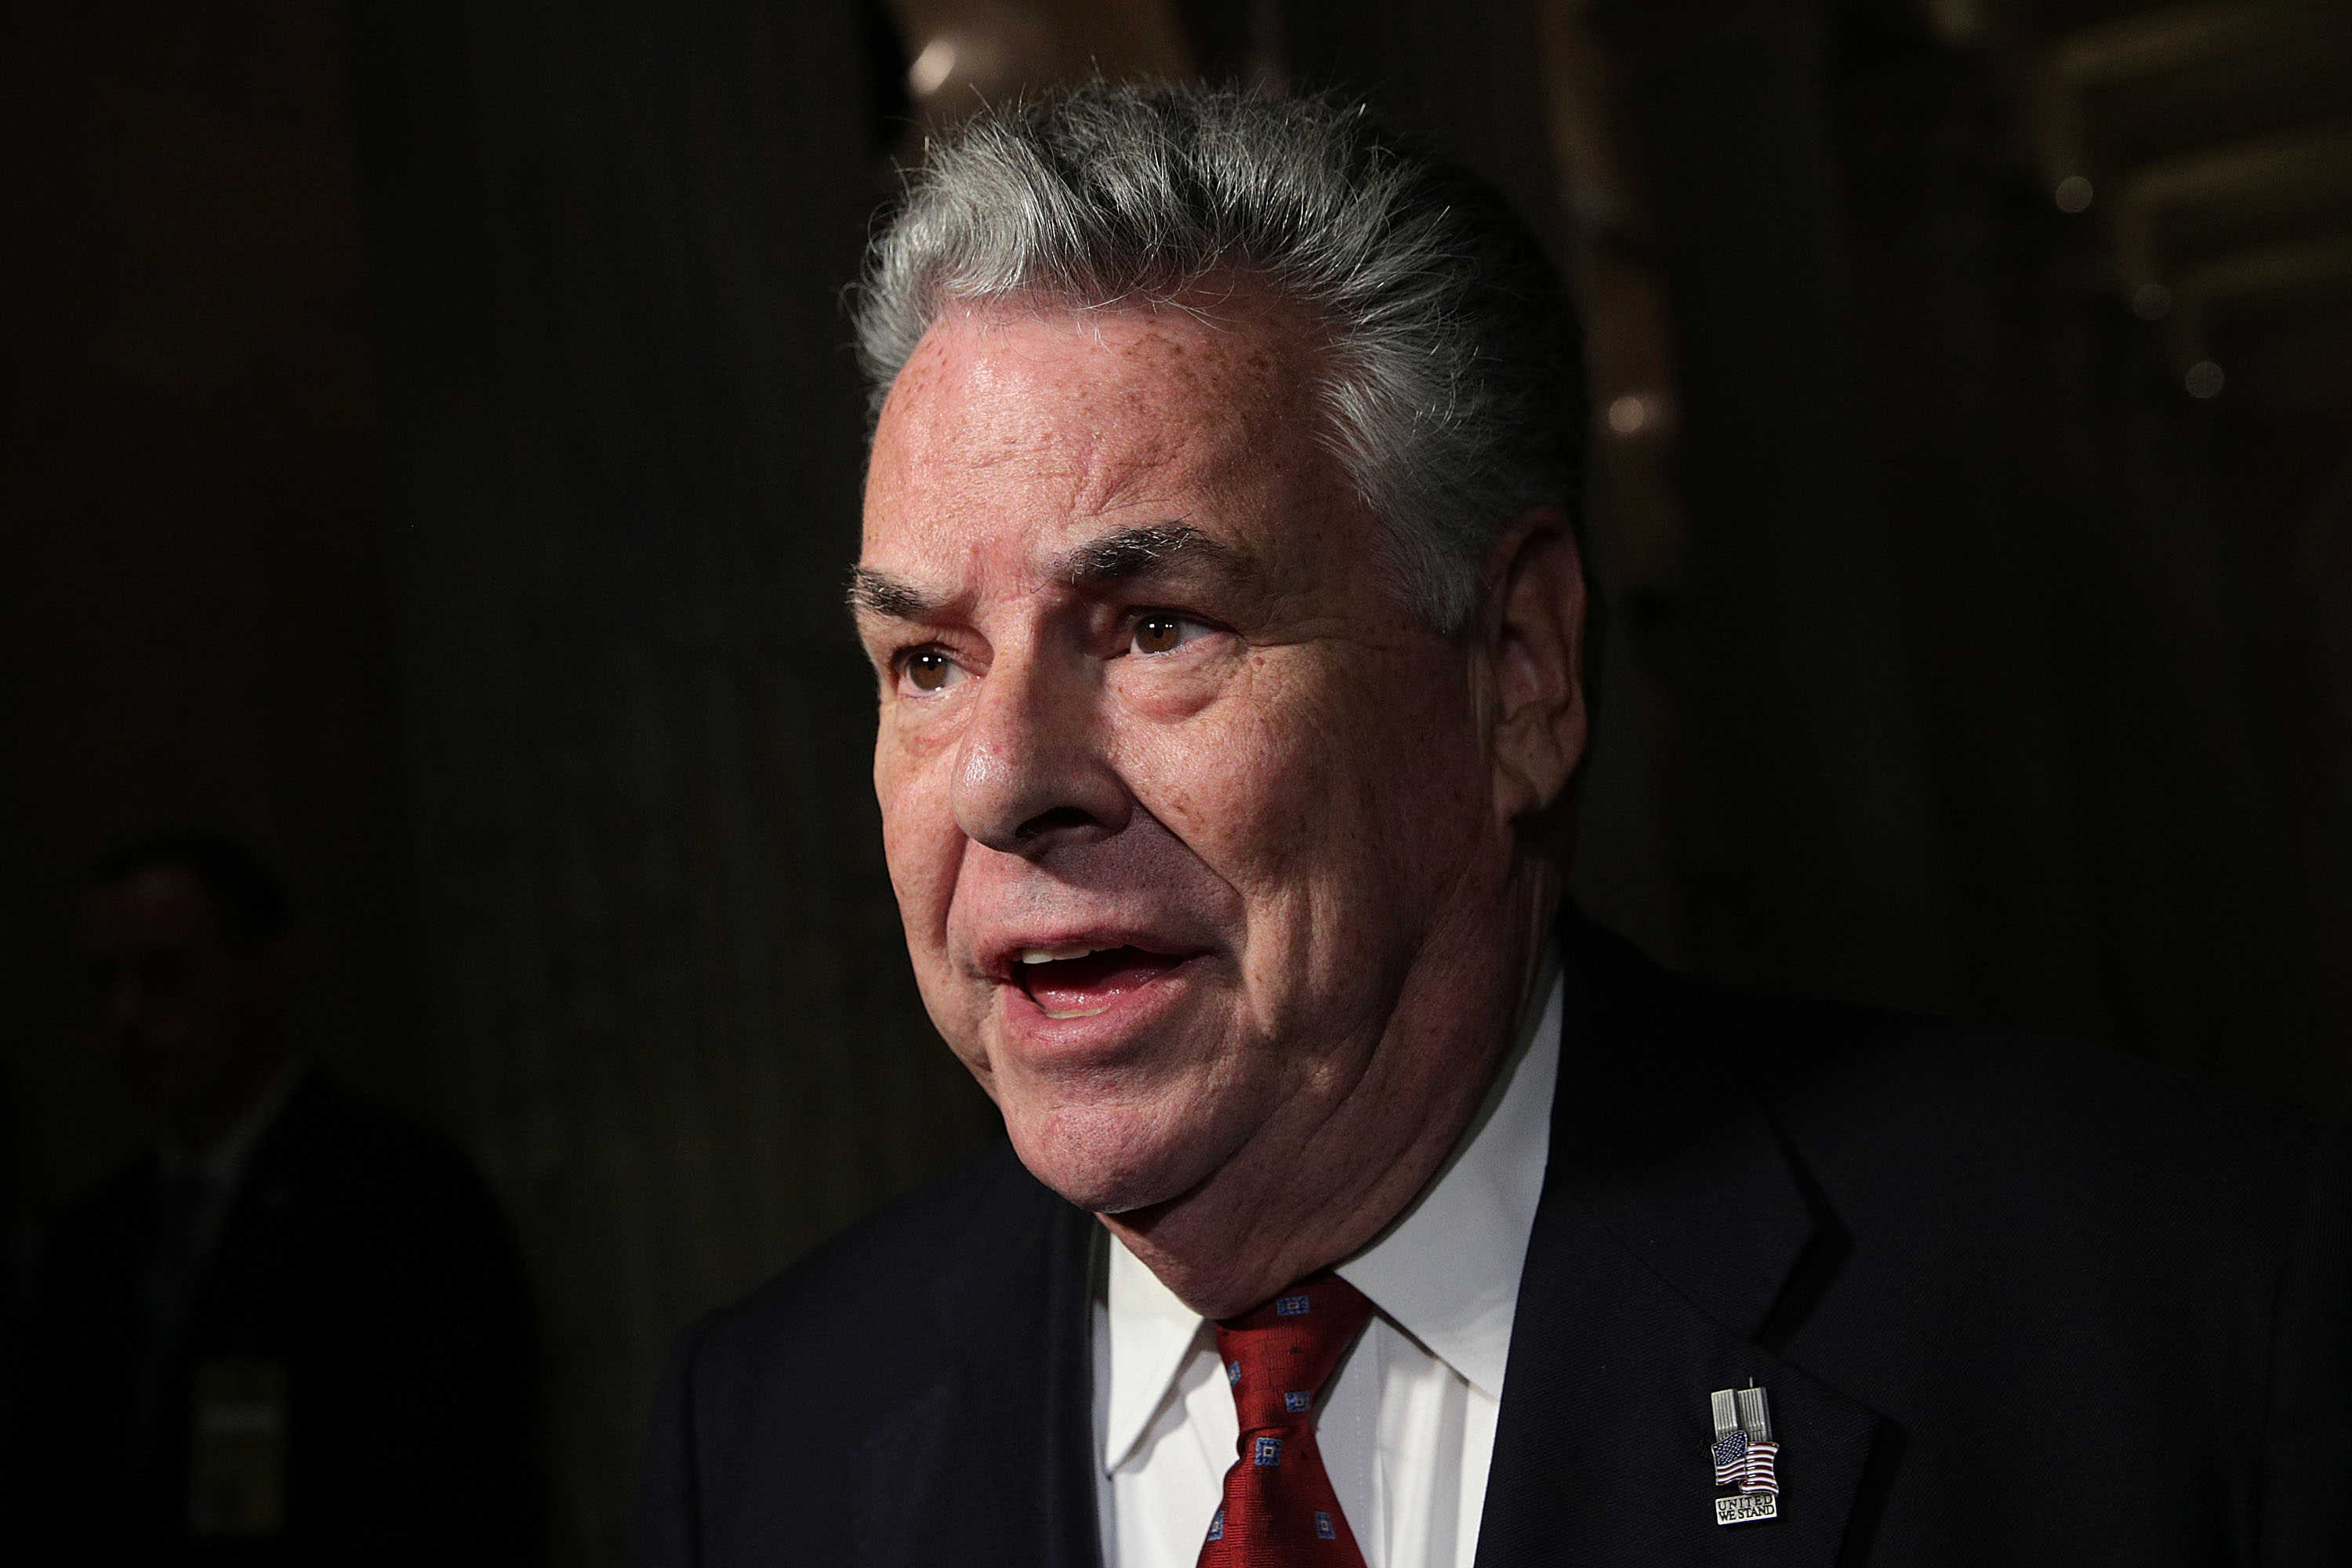 U.S. Rep. Peter King (R-NY) speaks to members of the media after President Donald Trump's visit to a House Republican Conference meeting November 16, 2017 in Washington, DC. President Trump travels to Capitol Hill to discuss the tax reform bill as the House prepare to vote on the bill today. (Photo by Alex Wong/Getty Images)